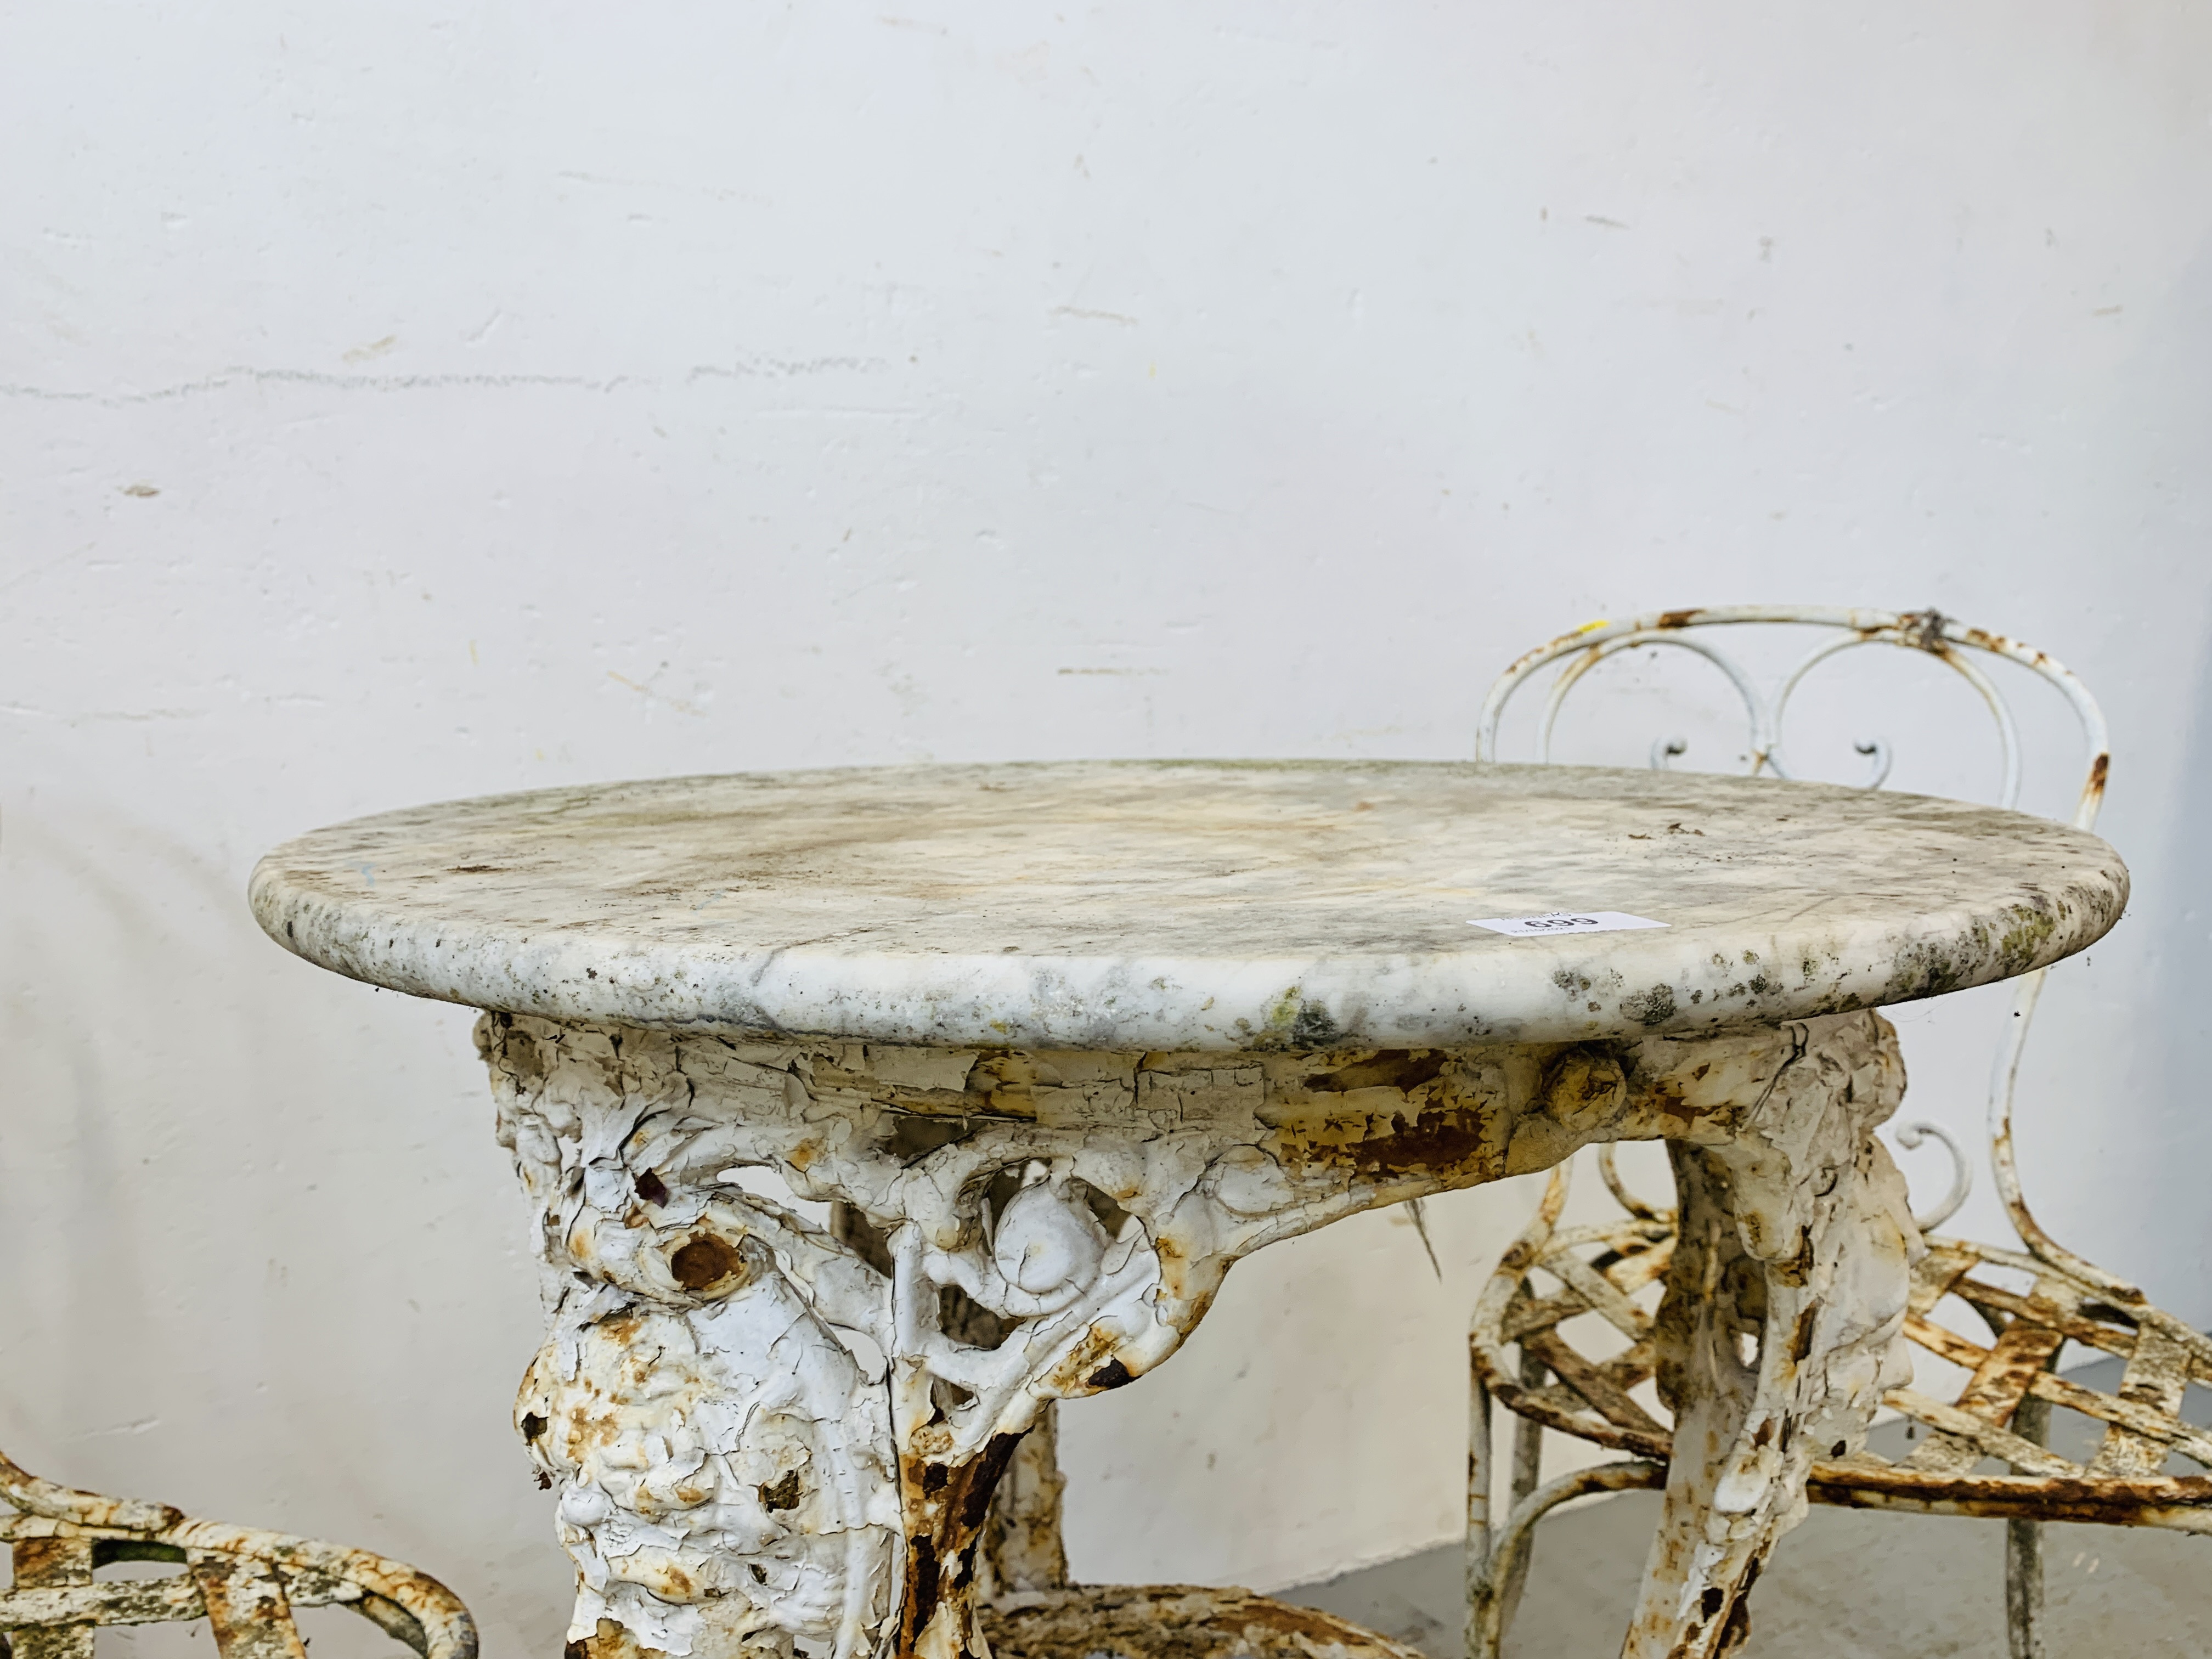 AN OLD DECORATIVE CAST BASE PUB TABLE WITH MARBLE TOP ALONG WITH 2 WROUGHT METAL GARDEN CHAIRS - - Image 8 of 11